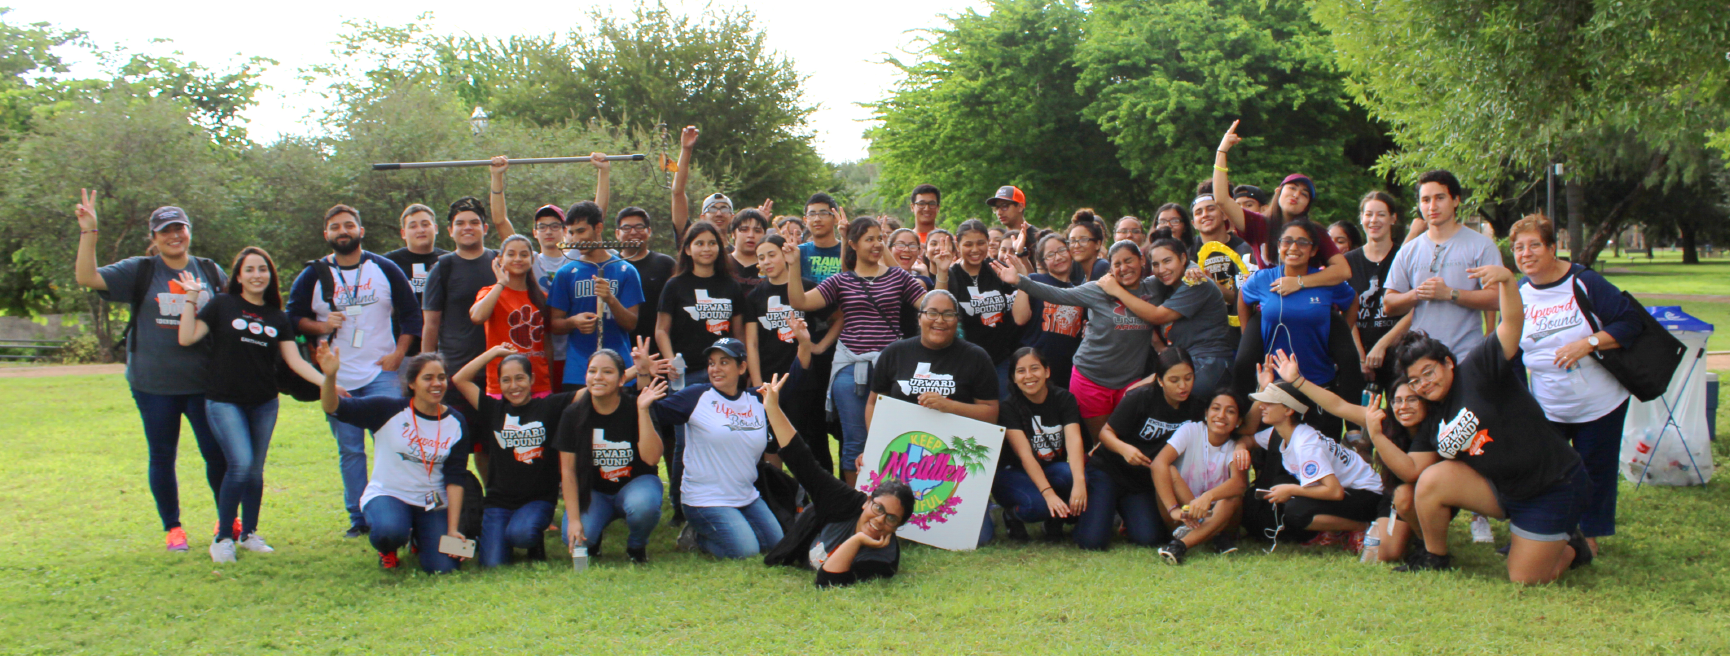 Keep McAllen Beautiful Group Picture